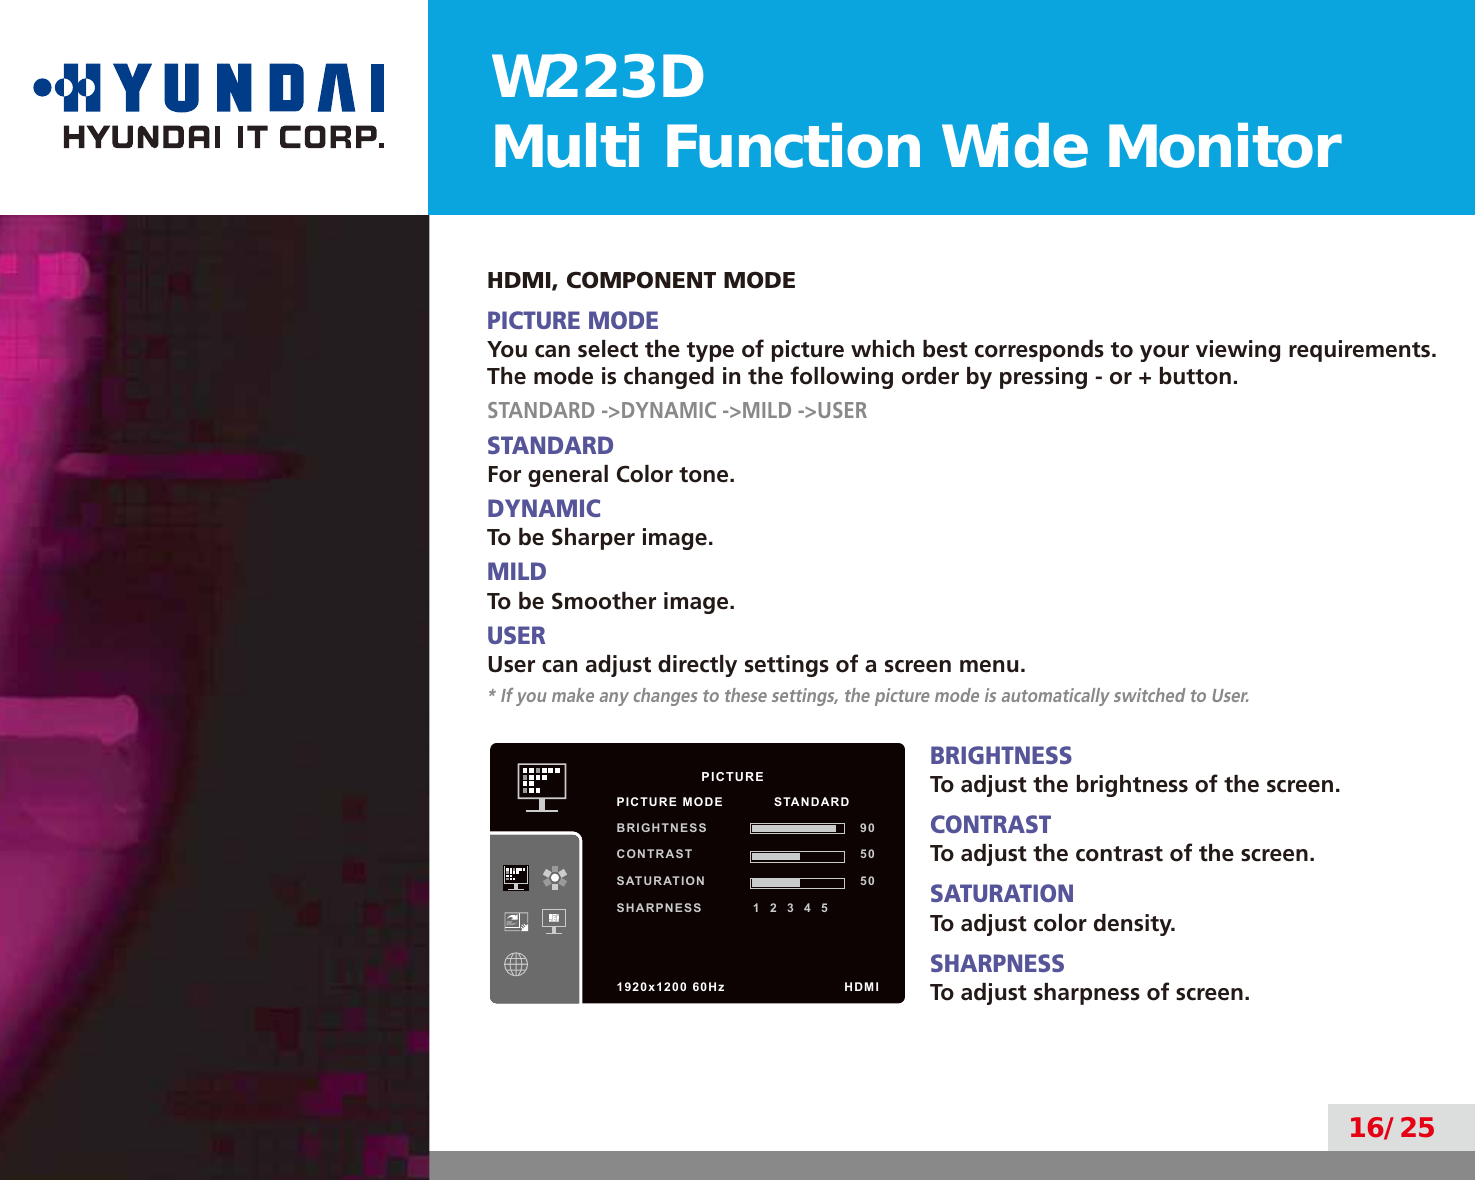 W223DMulti Function Wide Monitor16/25HDMI, COMPONENT MODEPICTURE MODEYou can select the type of picture which best corresponds to your viewing requirements.The mode is changed in the following order by pressing - or + button.STANDARD -&gt;DYNAMIC -&gt;MILD -&gt;USERSTANDARDFor general Color tone.DYNAMICTo be Sharper image.MILDTo be Smoother image.USERUser can adjust directly settings of a screen menu.* If you make any changes to these settings, the picture mode is automatically switched to User.BRIGHTNESSTo adjust the brightness of the screen.CONTRASTTo adjust the contrast of the screen.SATURATIONTo adjust color density.SHARPNESSTo adjust sharpness of screen.          PICTUREPICTURE MODE           STANDARDBRIGHTNESS 90CONTRAST 50SATURATION 50SHARPNESS           1  2  3  4  51920x1200 60Hz              HDMI